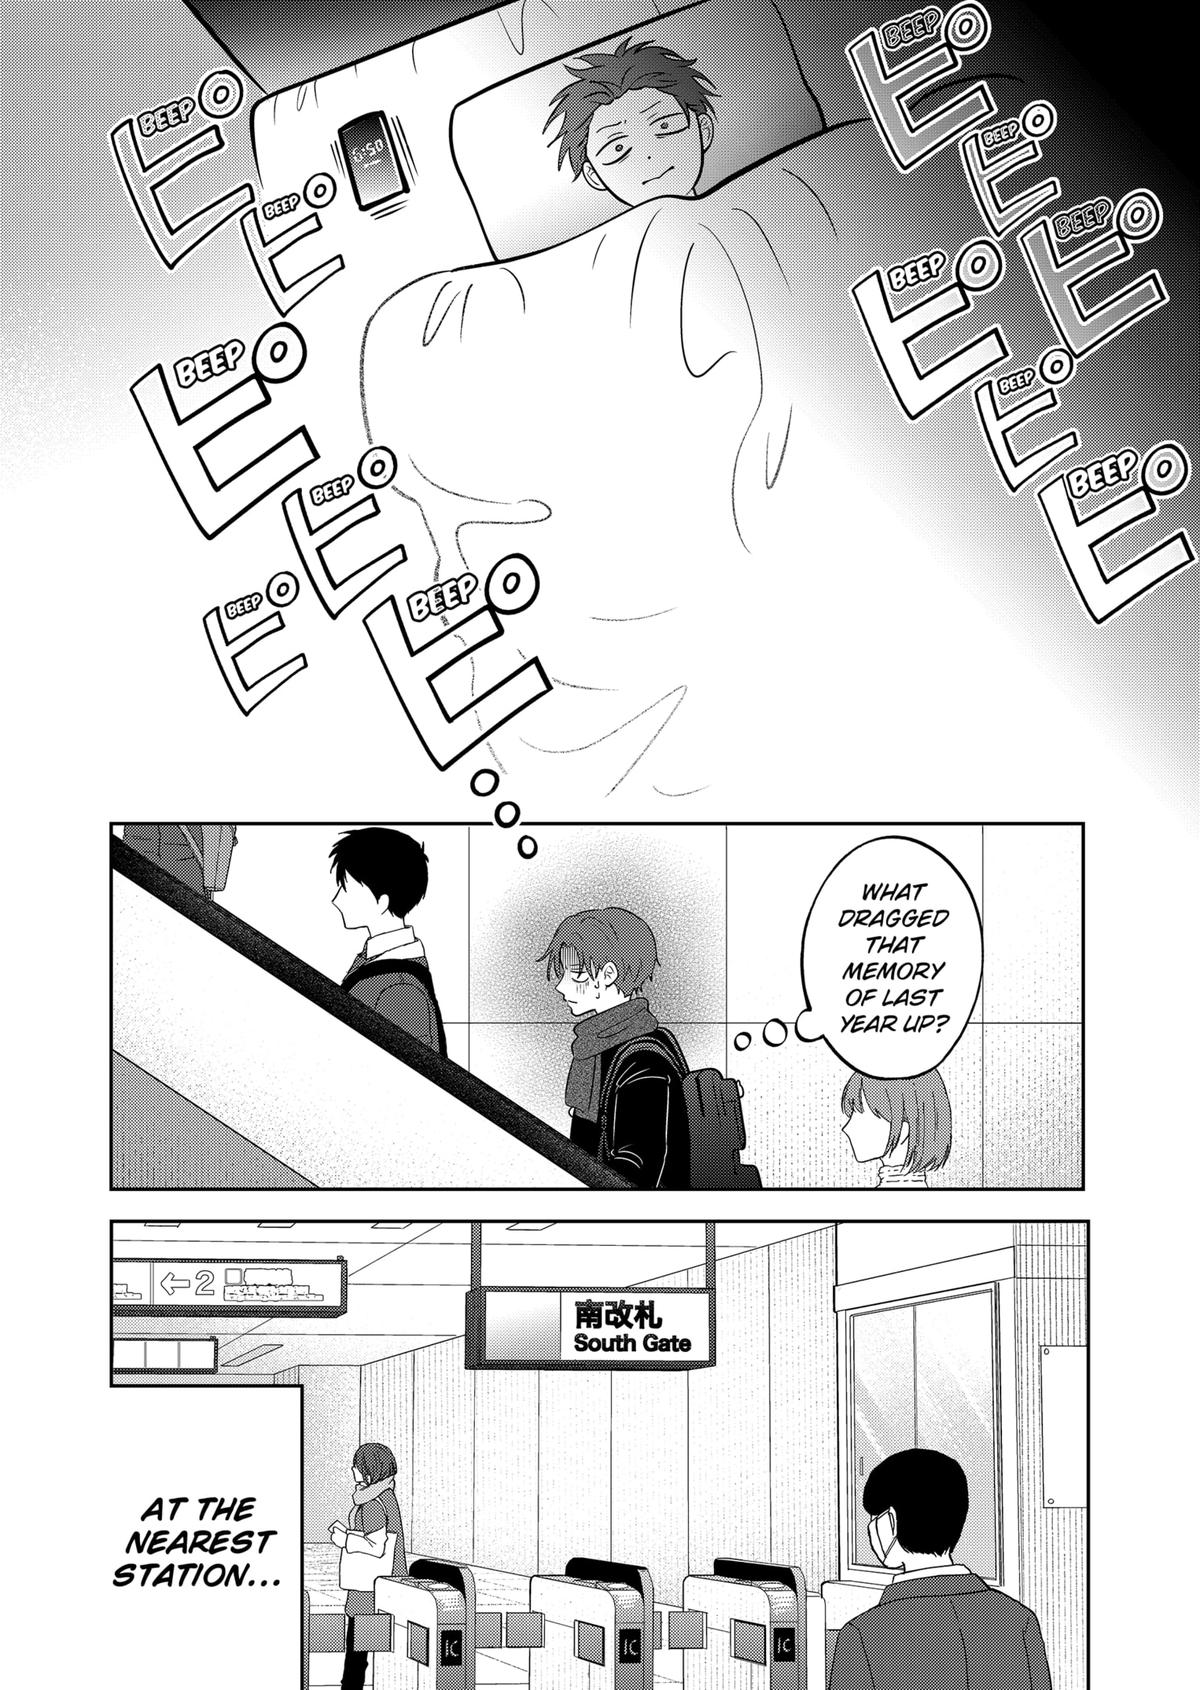 You And I Are Polar Opposites - Page 2